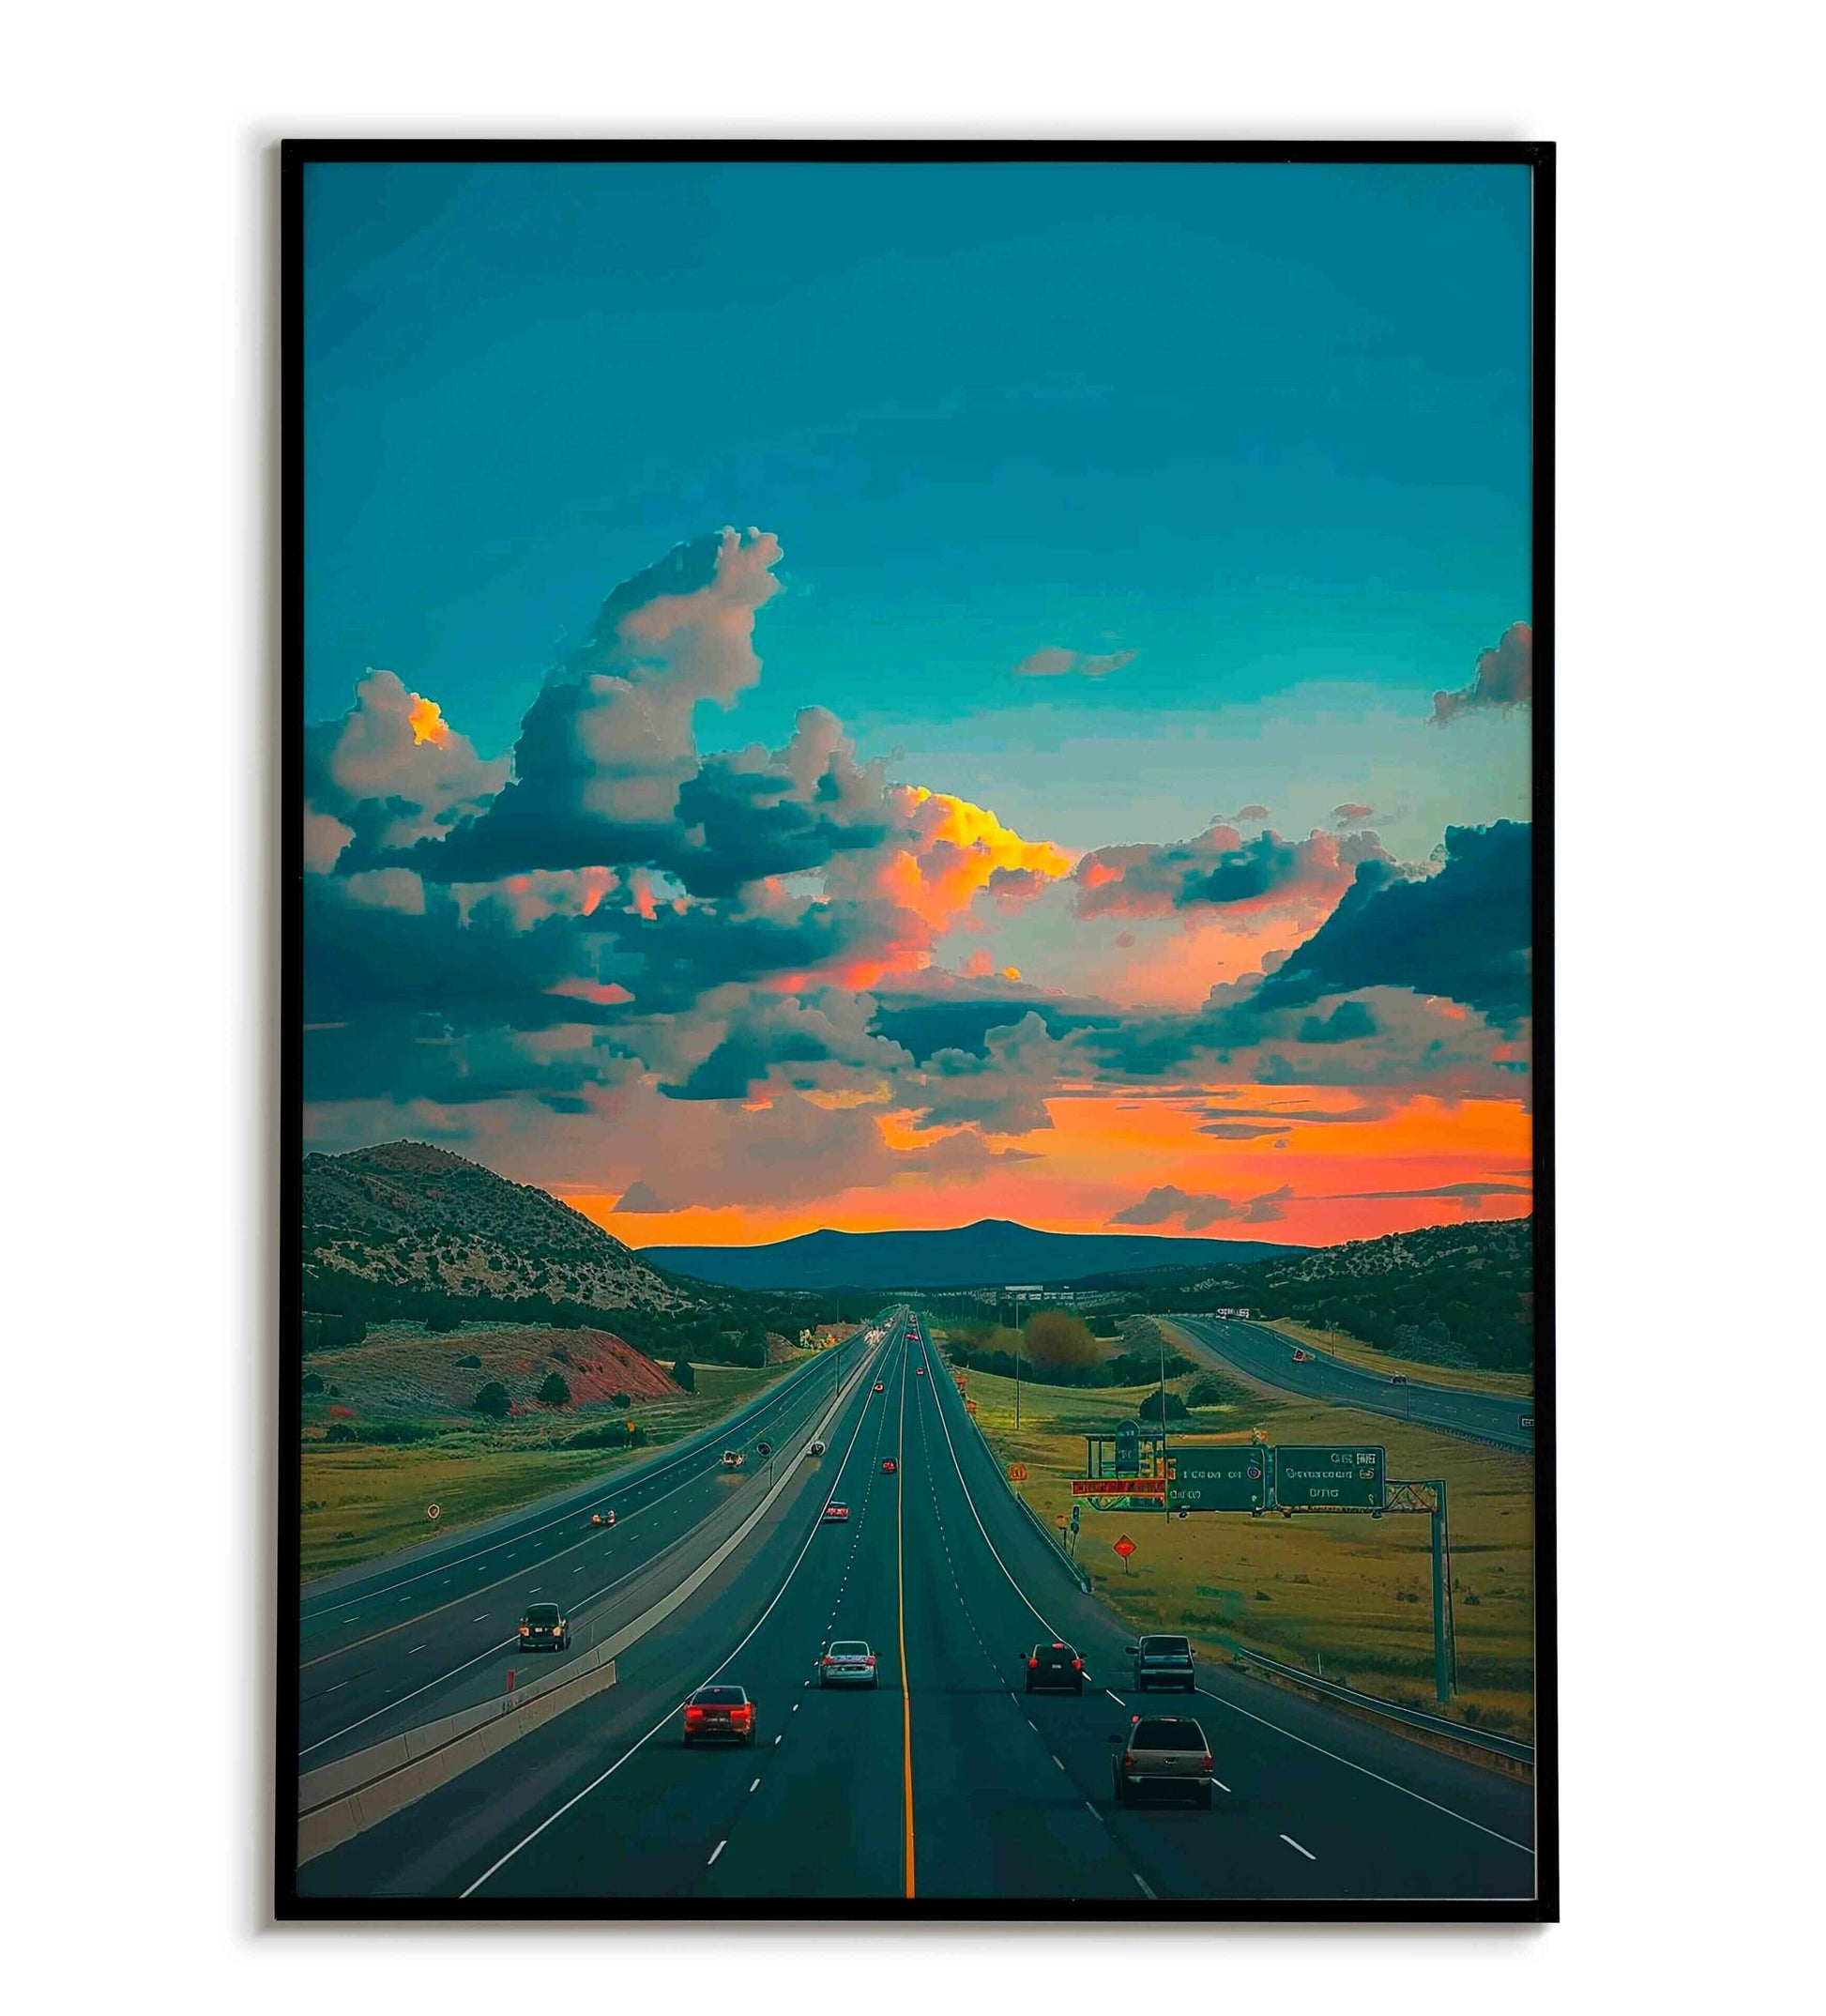 Highway travel printable poster. Available for purchase as a physical poster or digital download